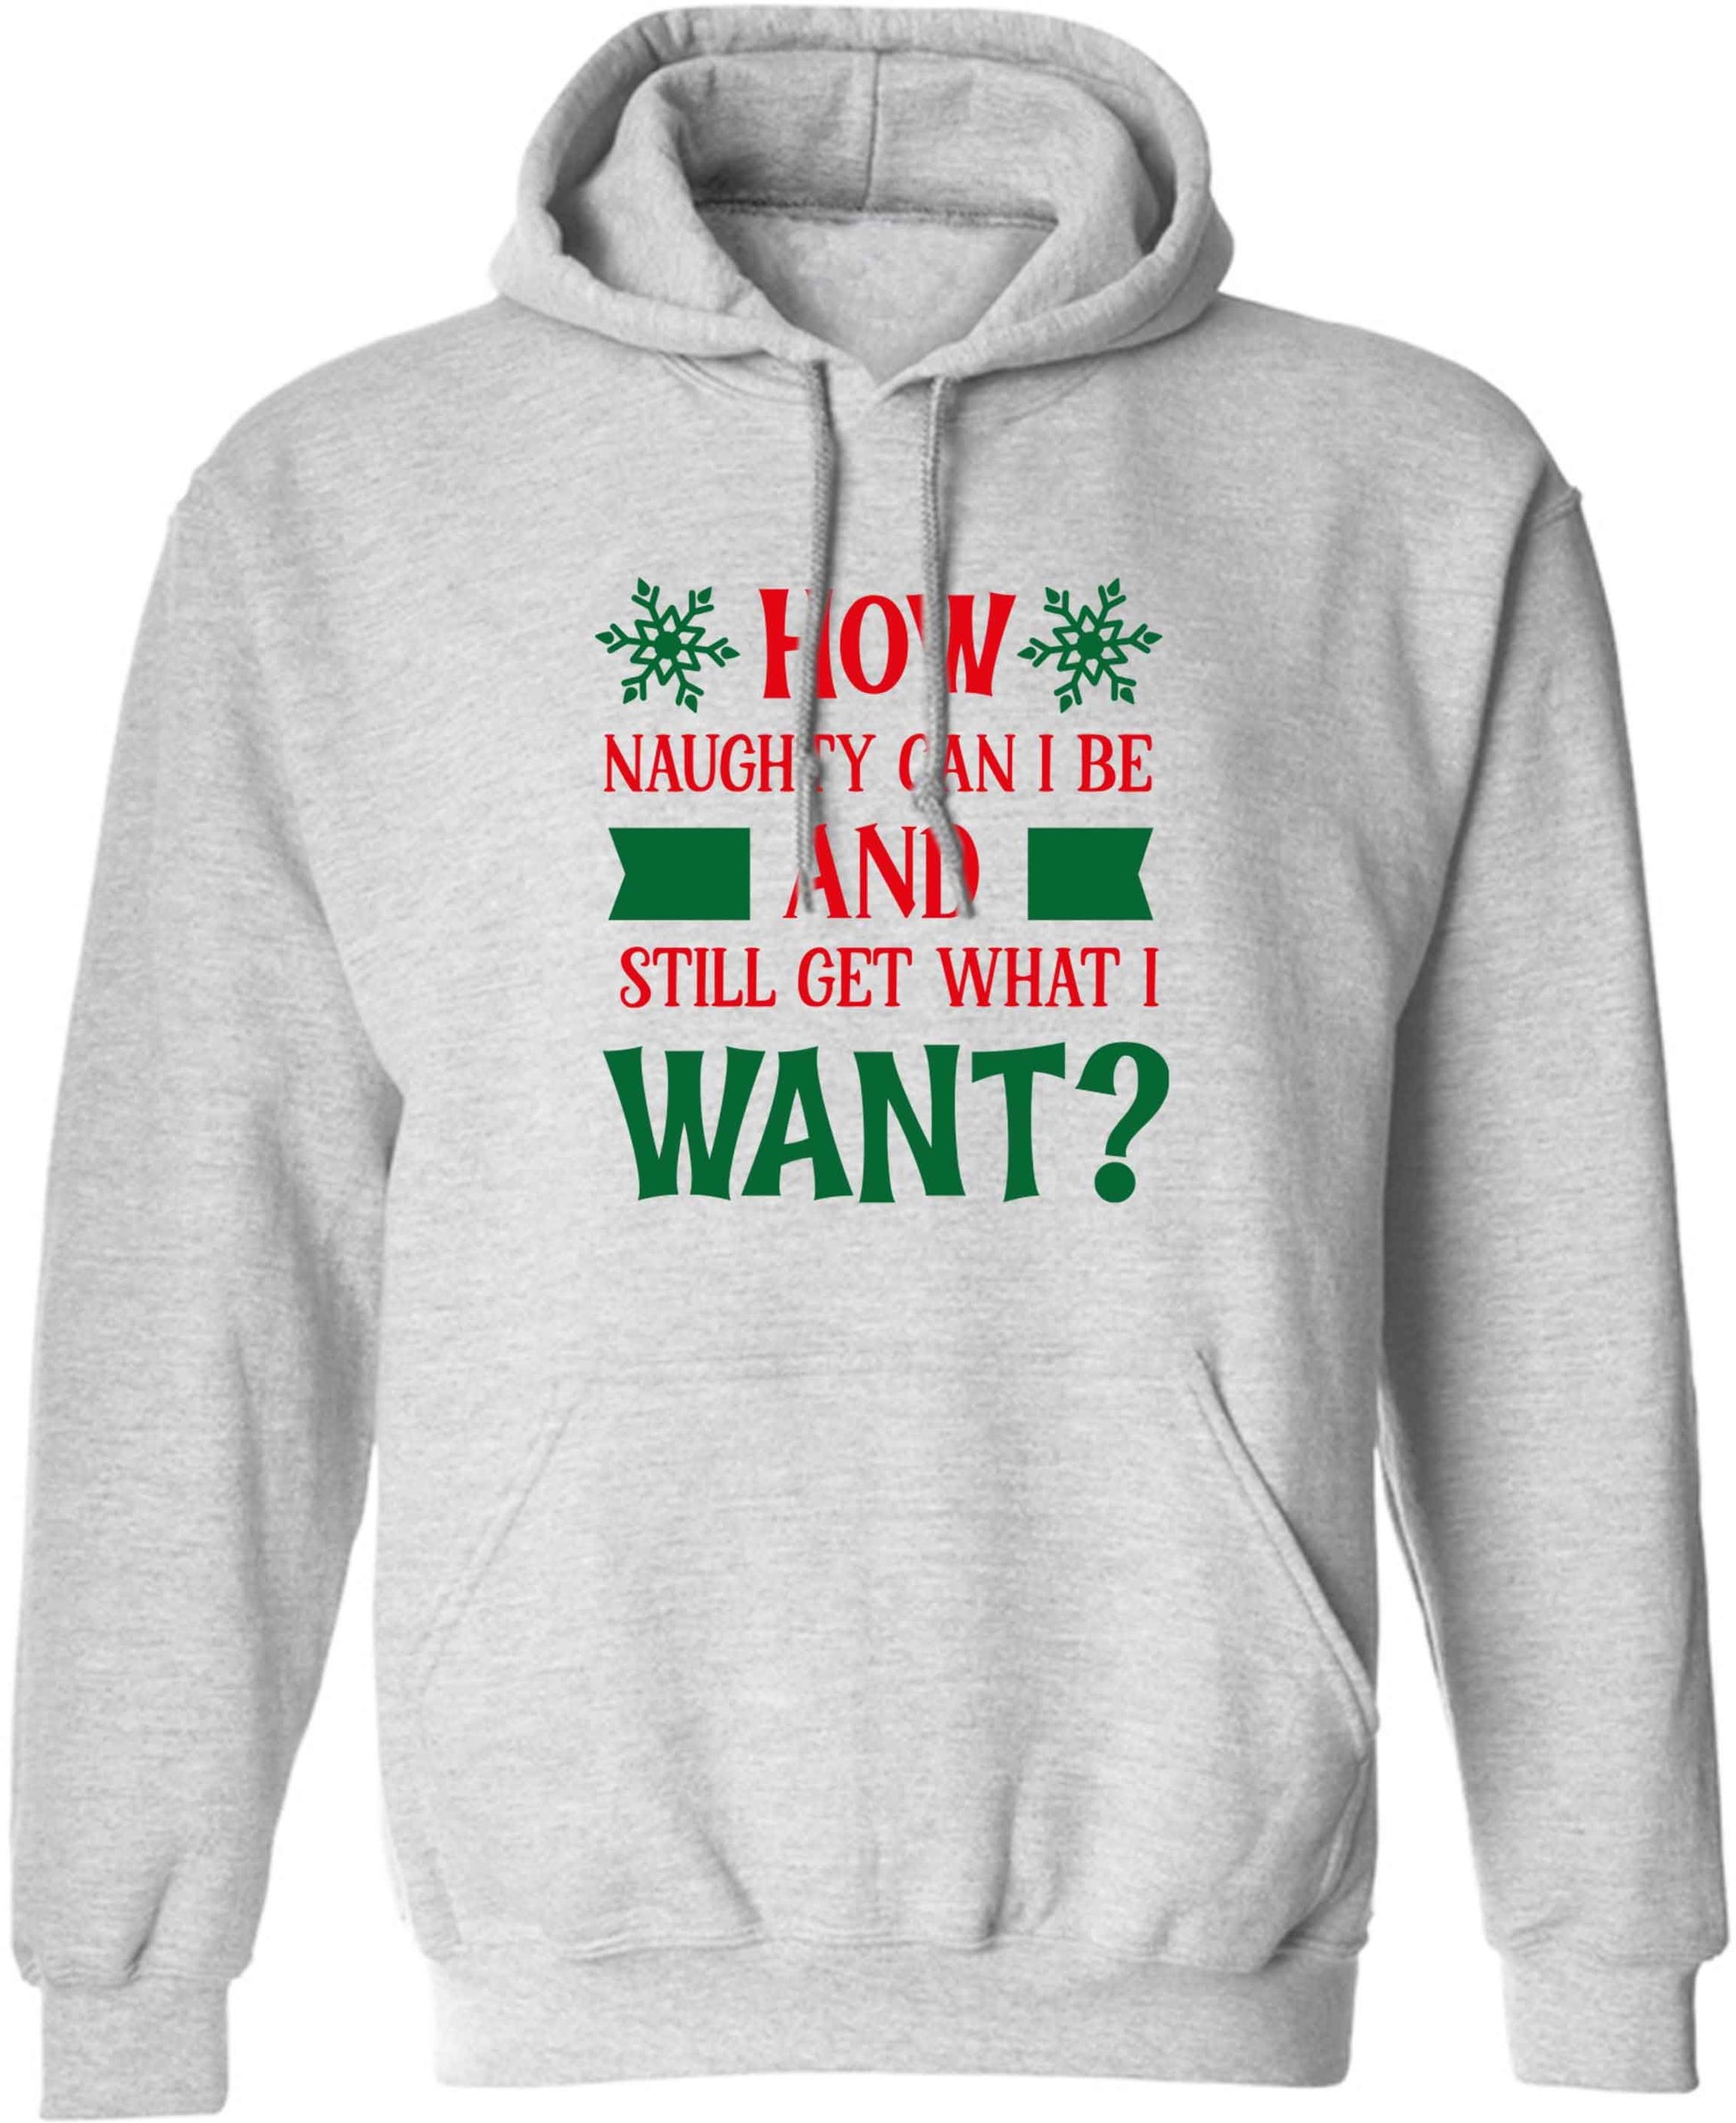 How naughty can I be and still get what I want? adults unisex grey hoodie 2XL